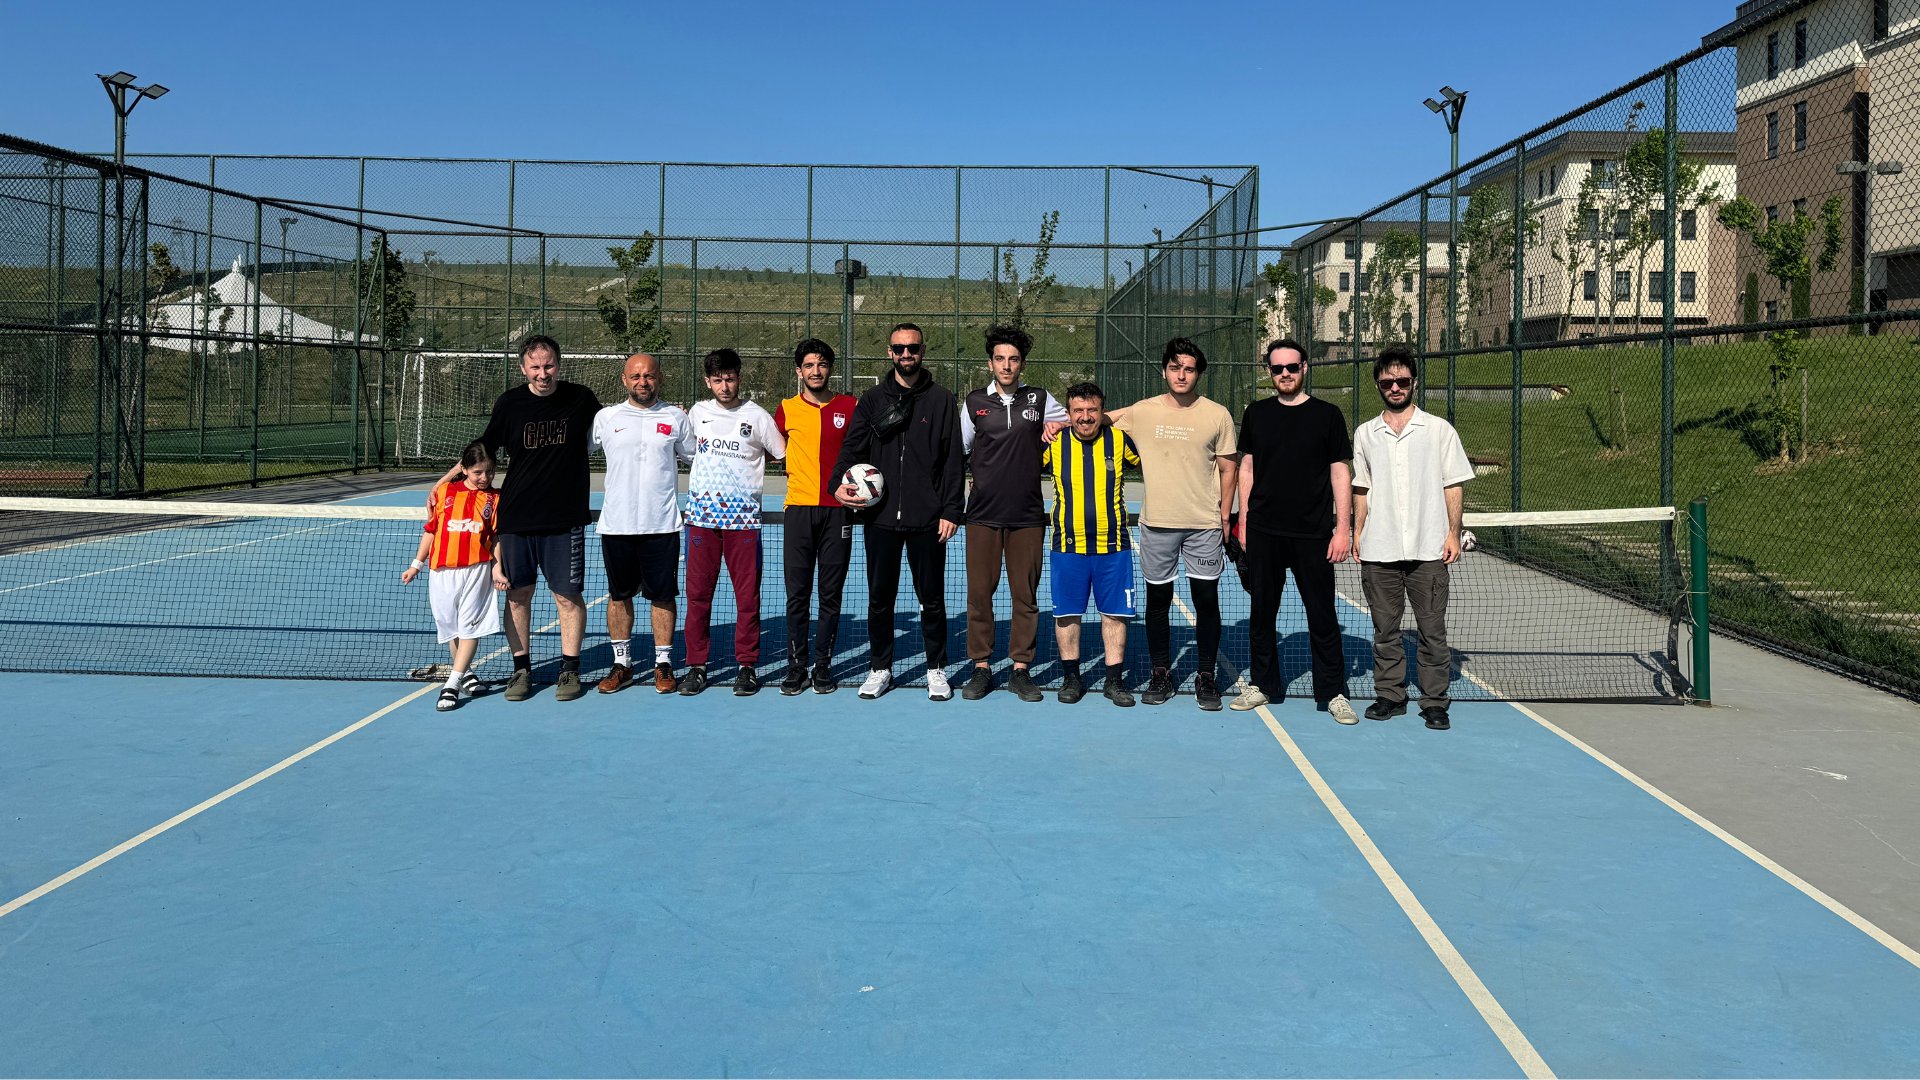 The Rector's Cup Foot Tennis Tournament has been completed.